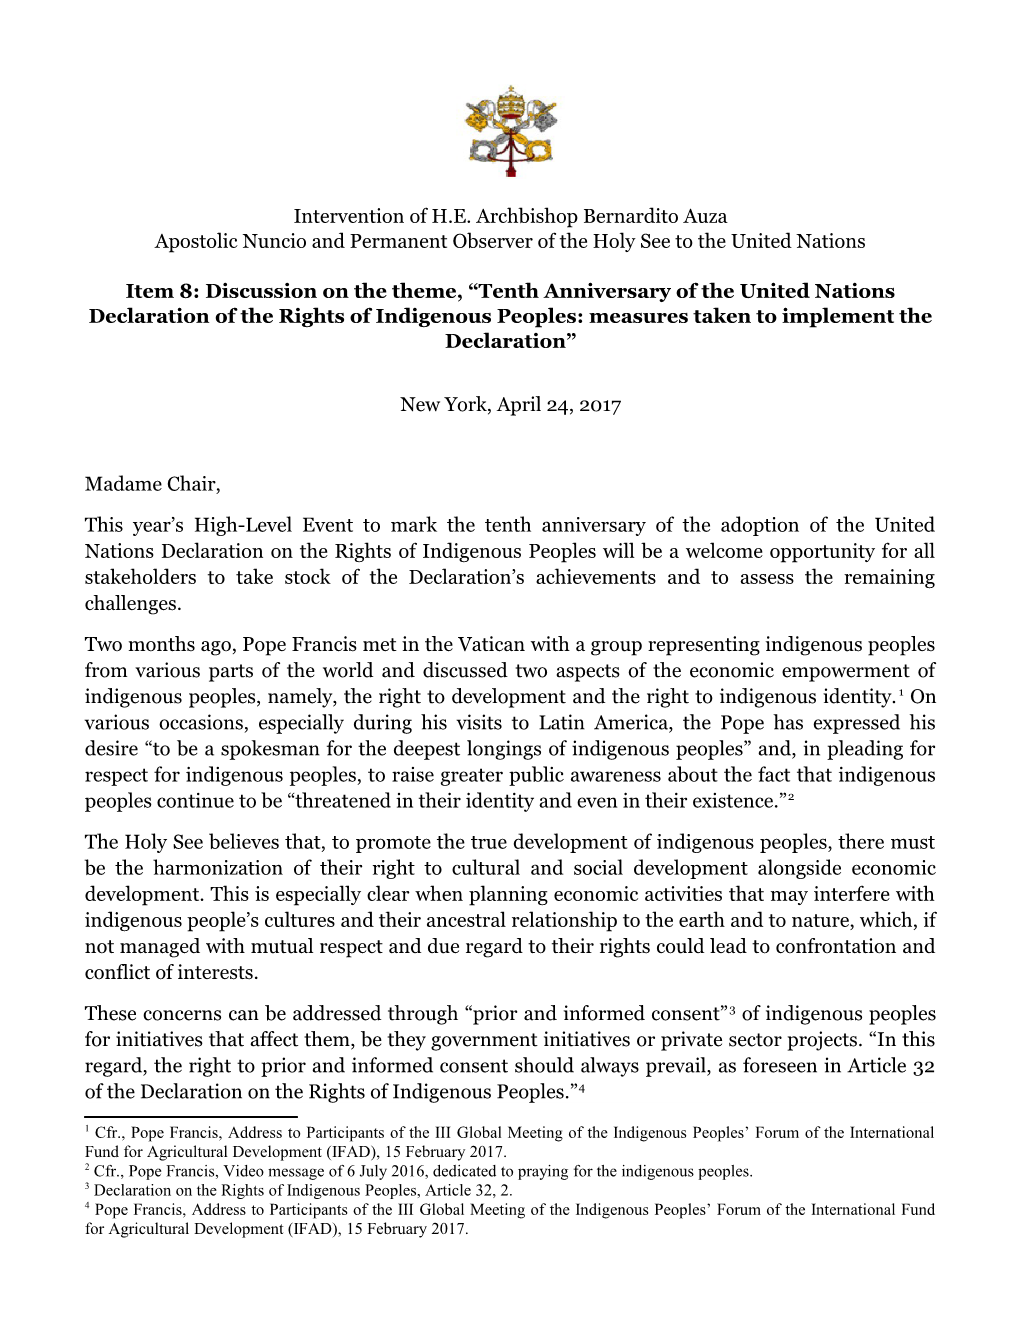 Intervention of H.E. Archbishop Bernardito Auza Apostolic Nuncio and Permanent Observer of the Holy See to the United Nations